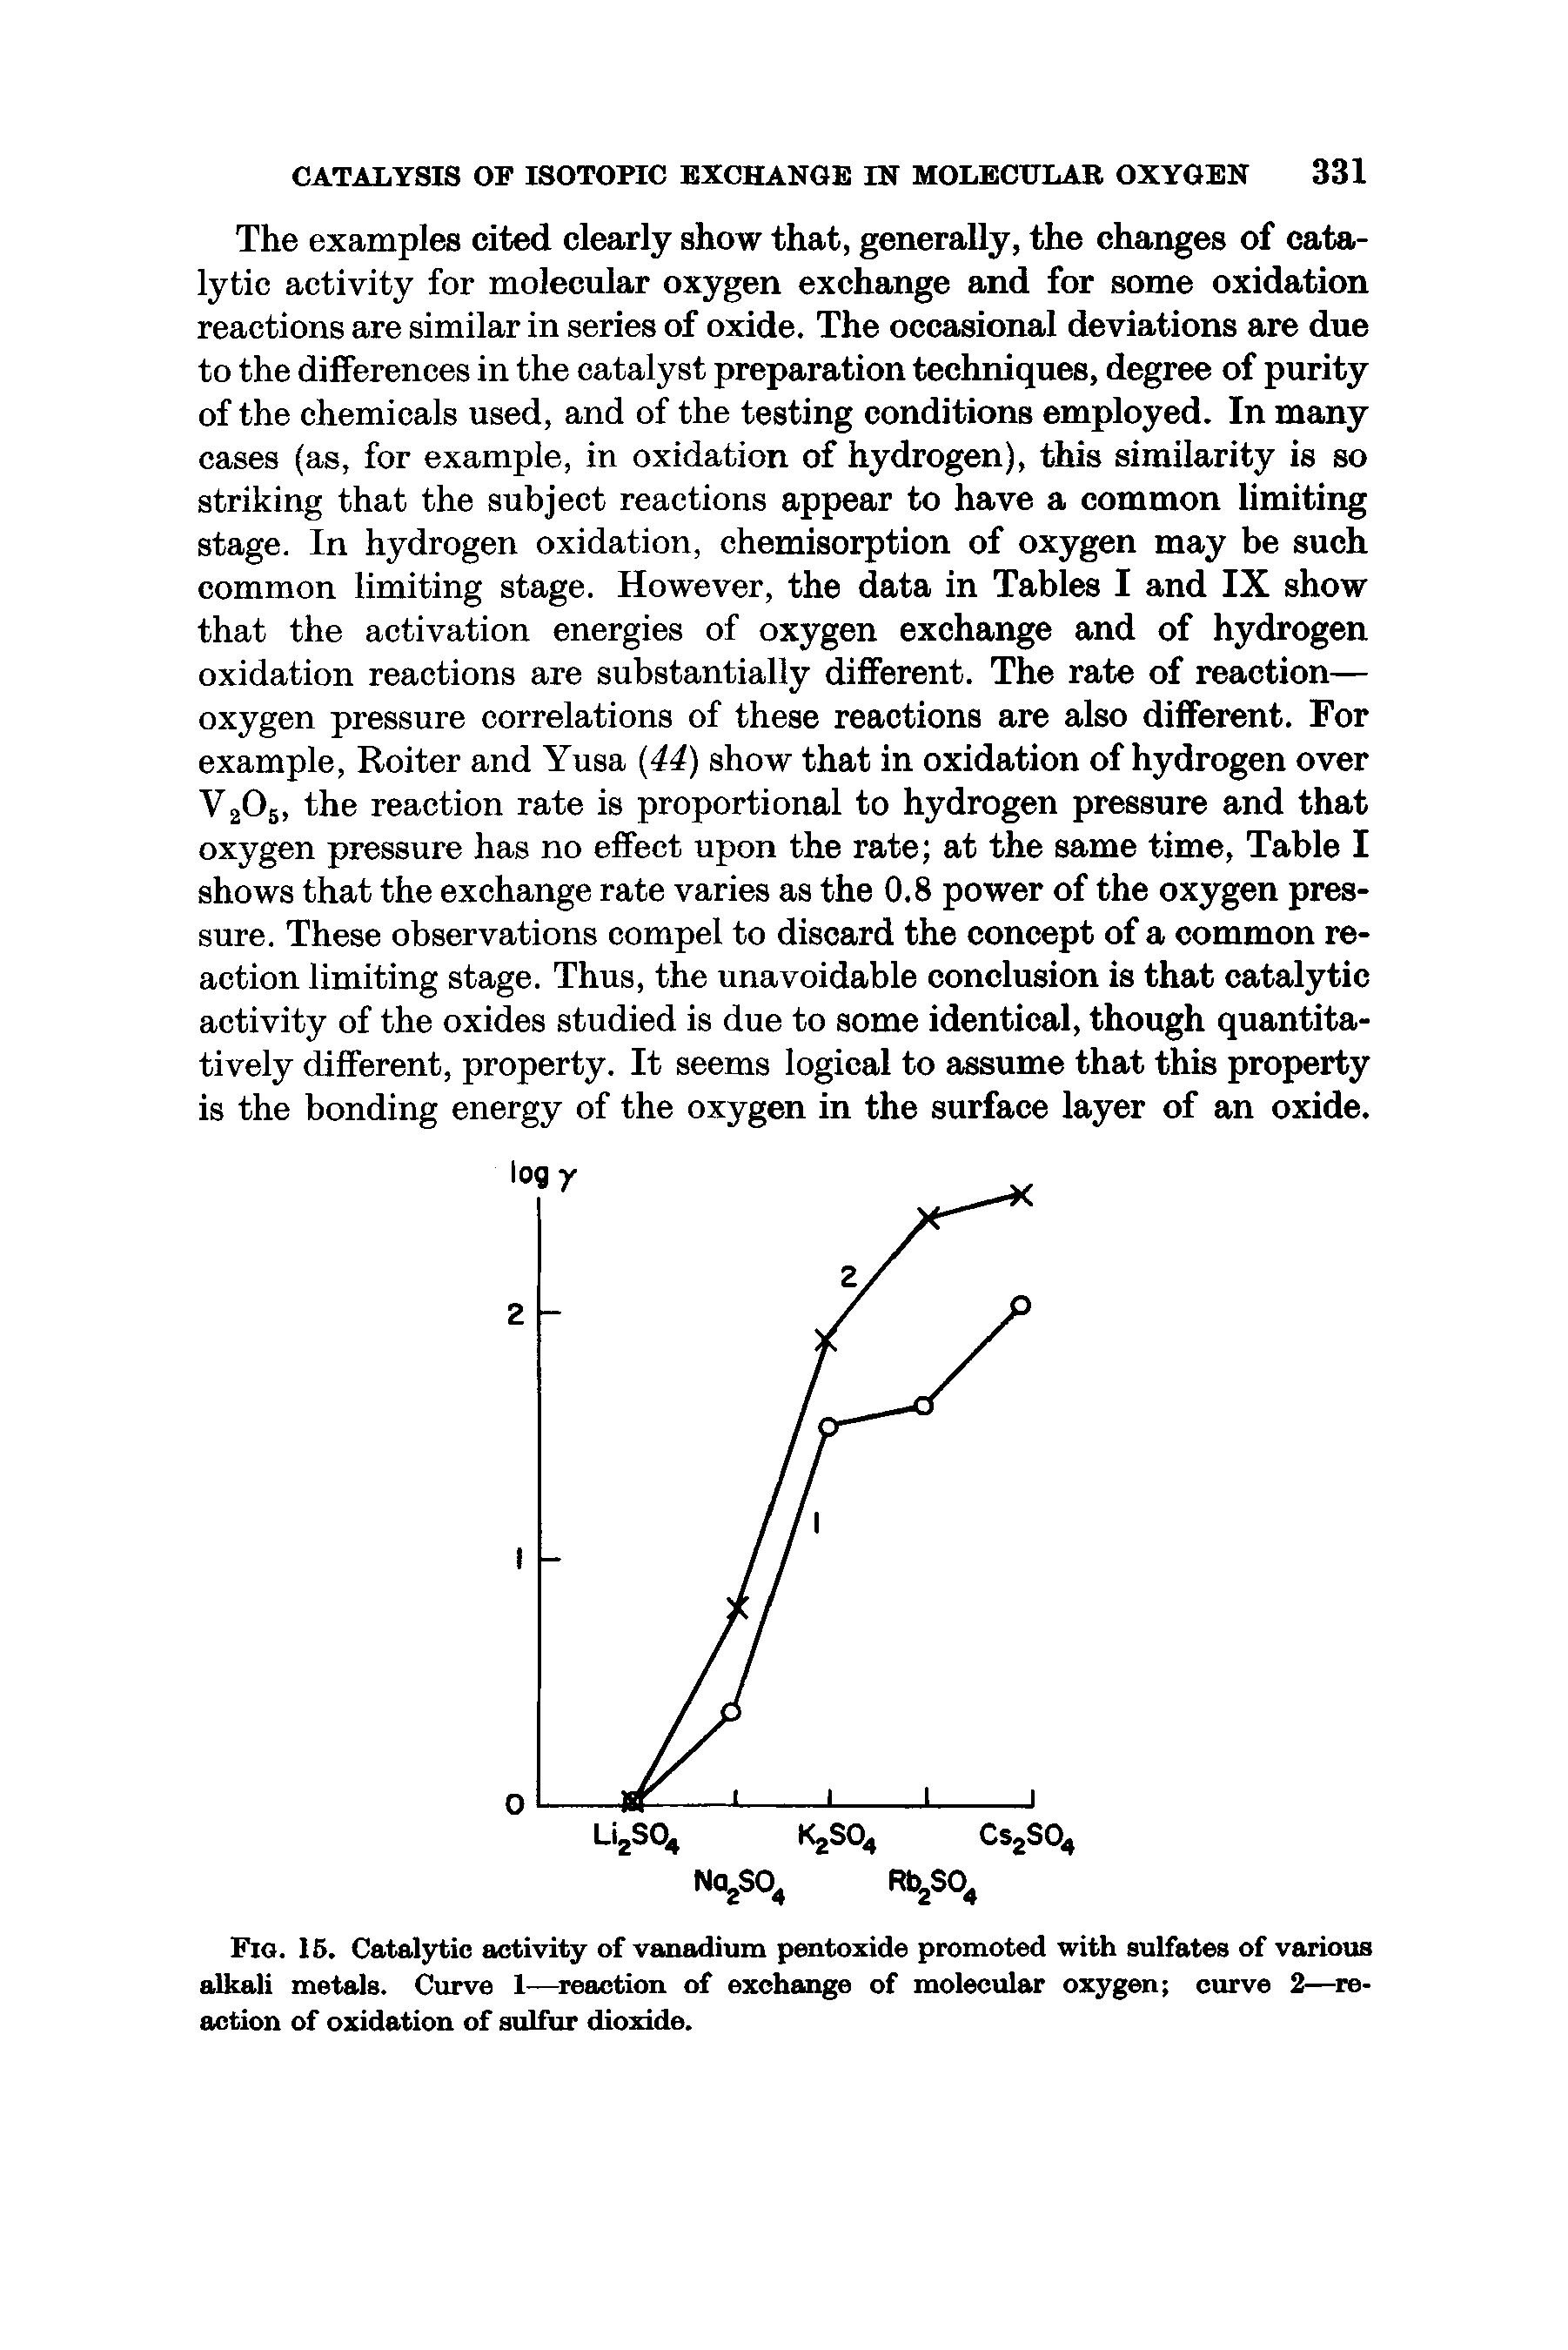 Fig. 15. Catalytic activity of vanadium pentoxide promoted with sulfates of various alkali metals. Curve 1— reaction of exchange of molecular oxygen curve 2—reaction of oxidation of sulfur dioxide.